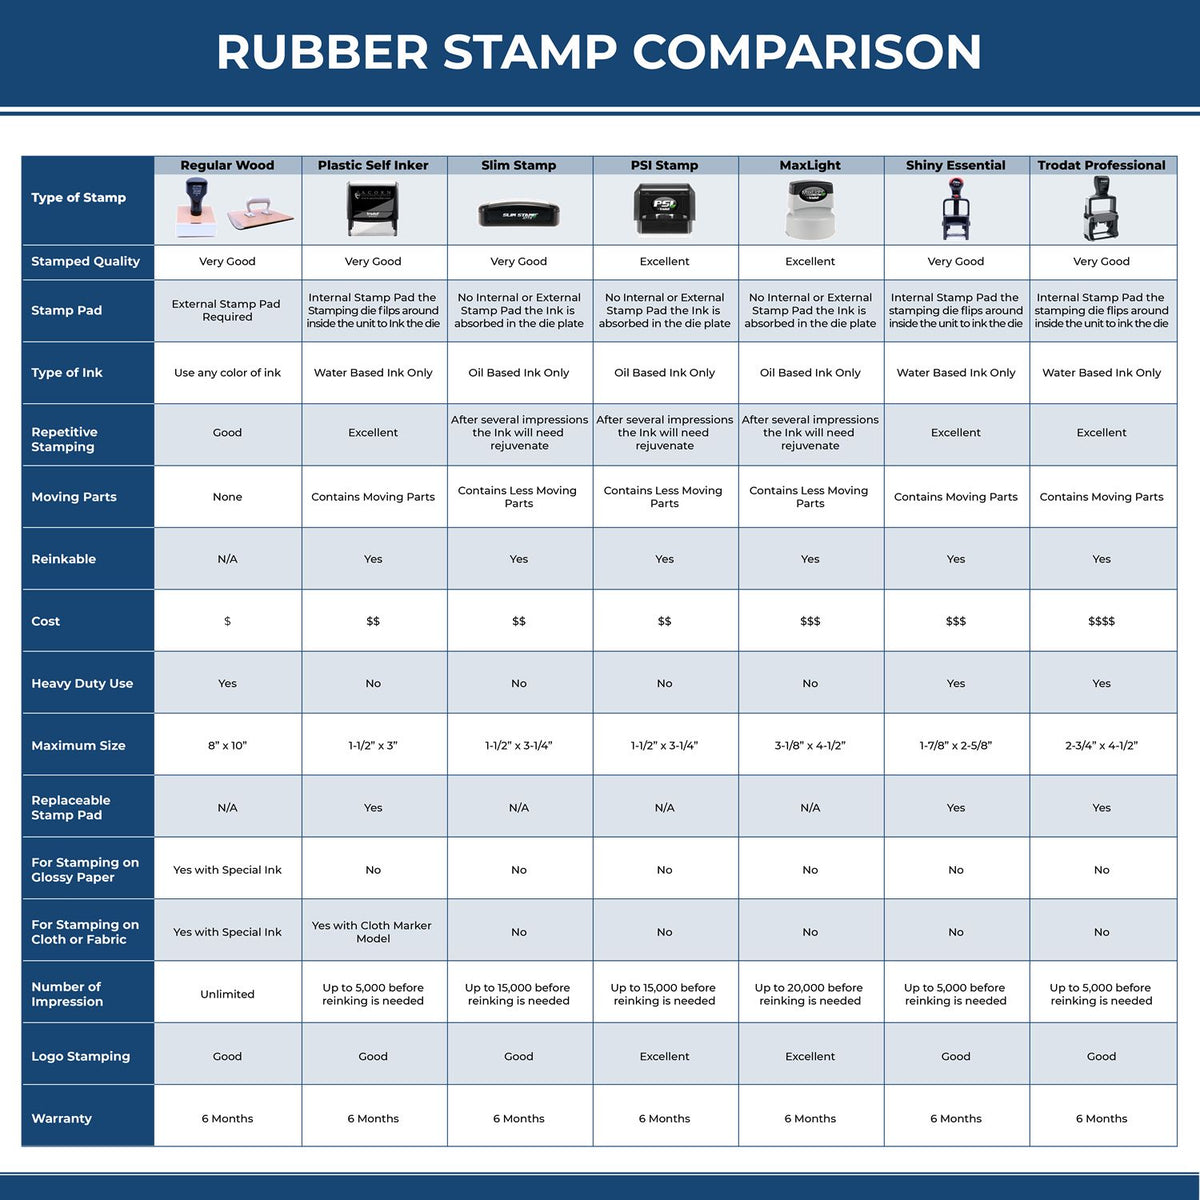 Large Self-Inking Benefits Assigned Stamp 4986S Rubber Stamp Comparison